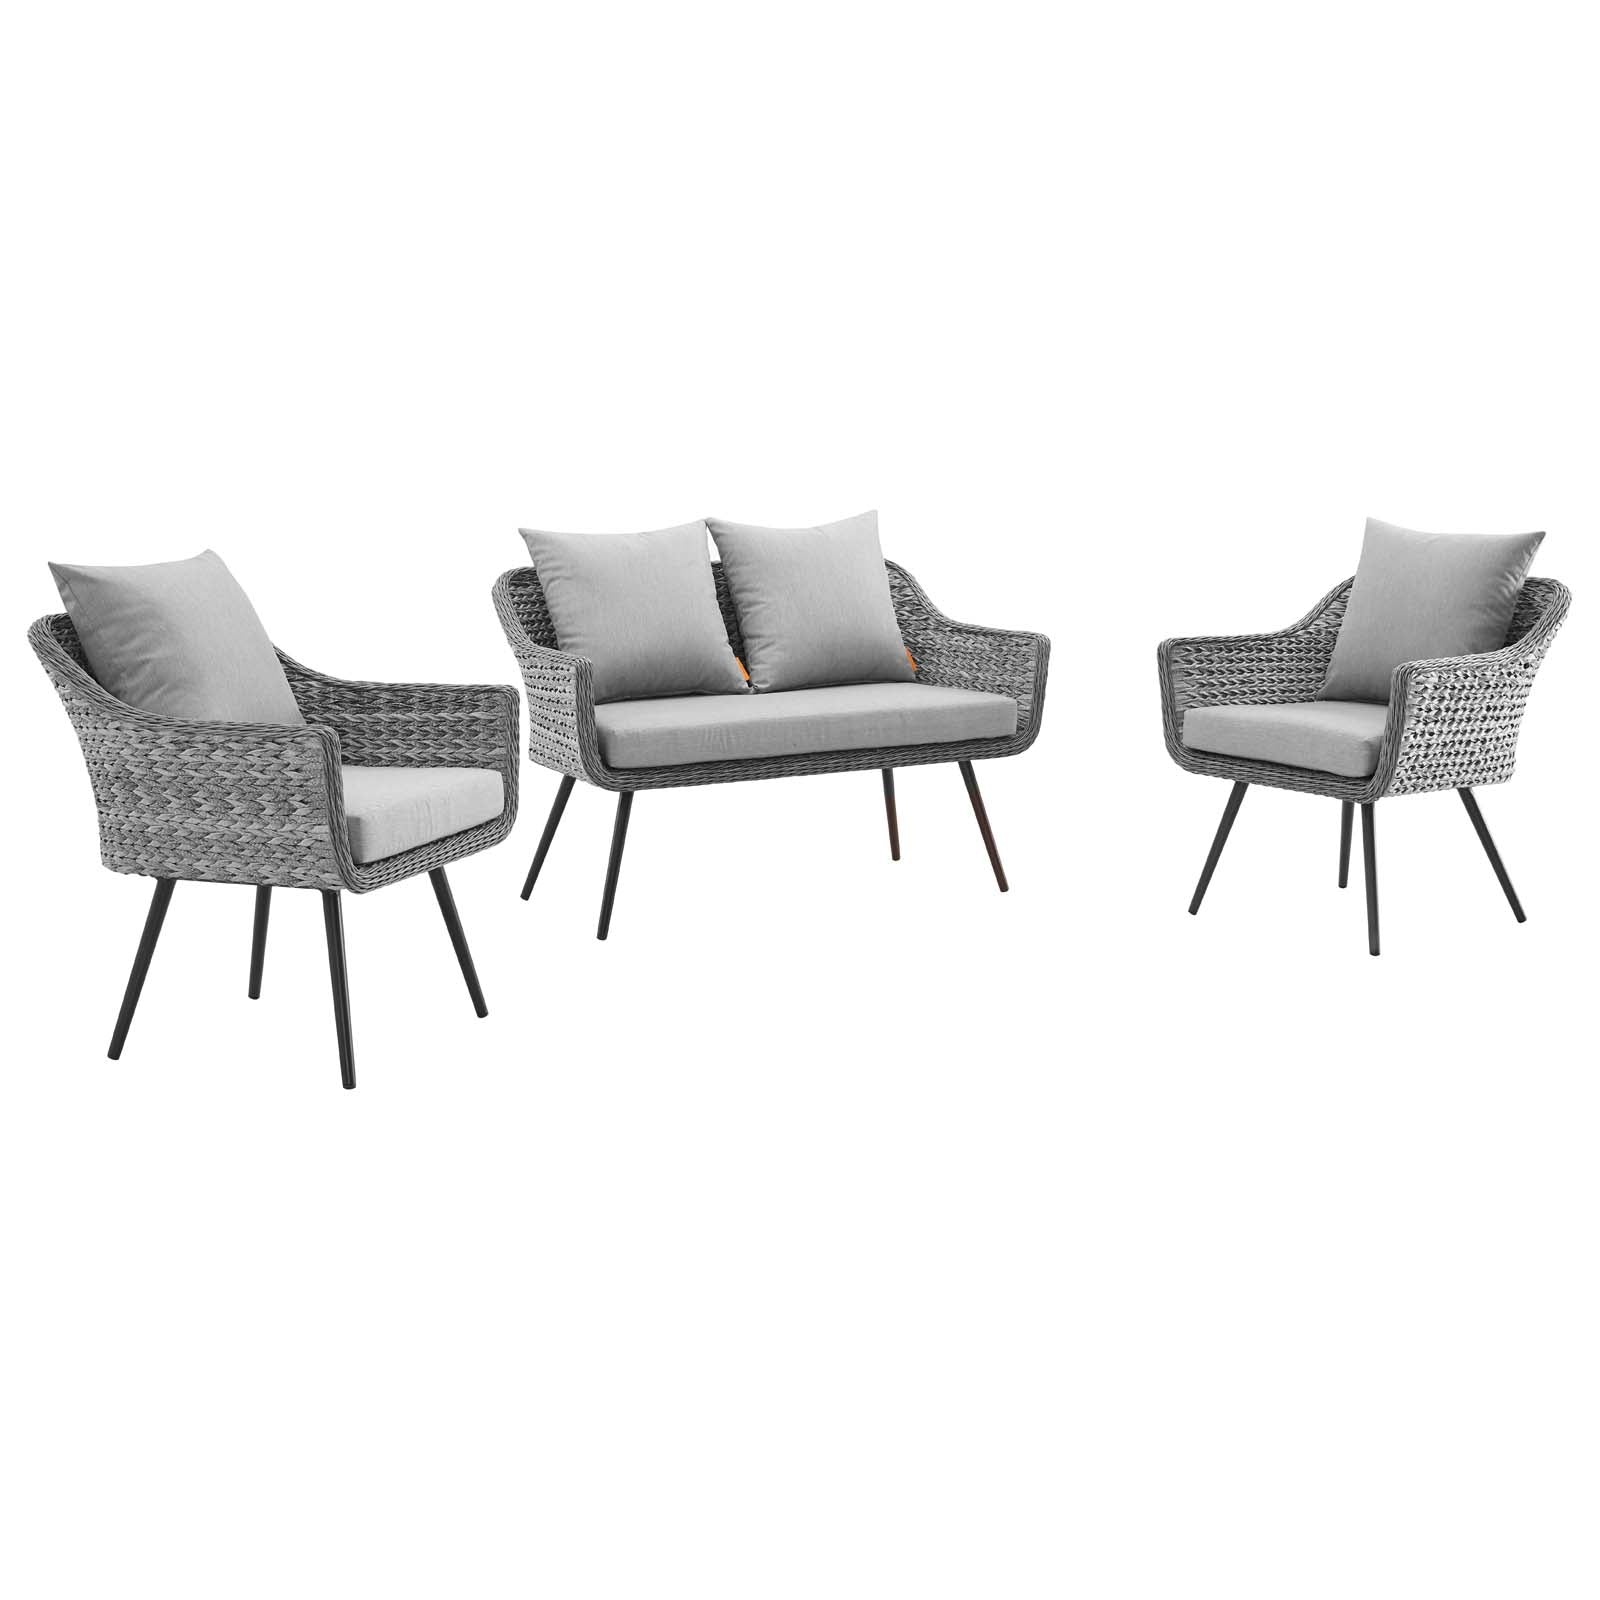 Endeavor 3 Piece Outdoor Patio Wicker Rattan Loveseat and Armchair Set - East Shore Modern Home Furnishings